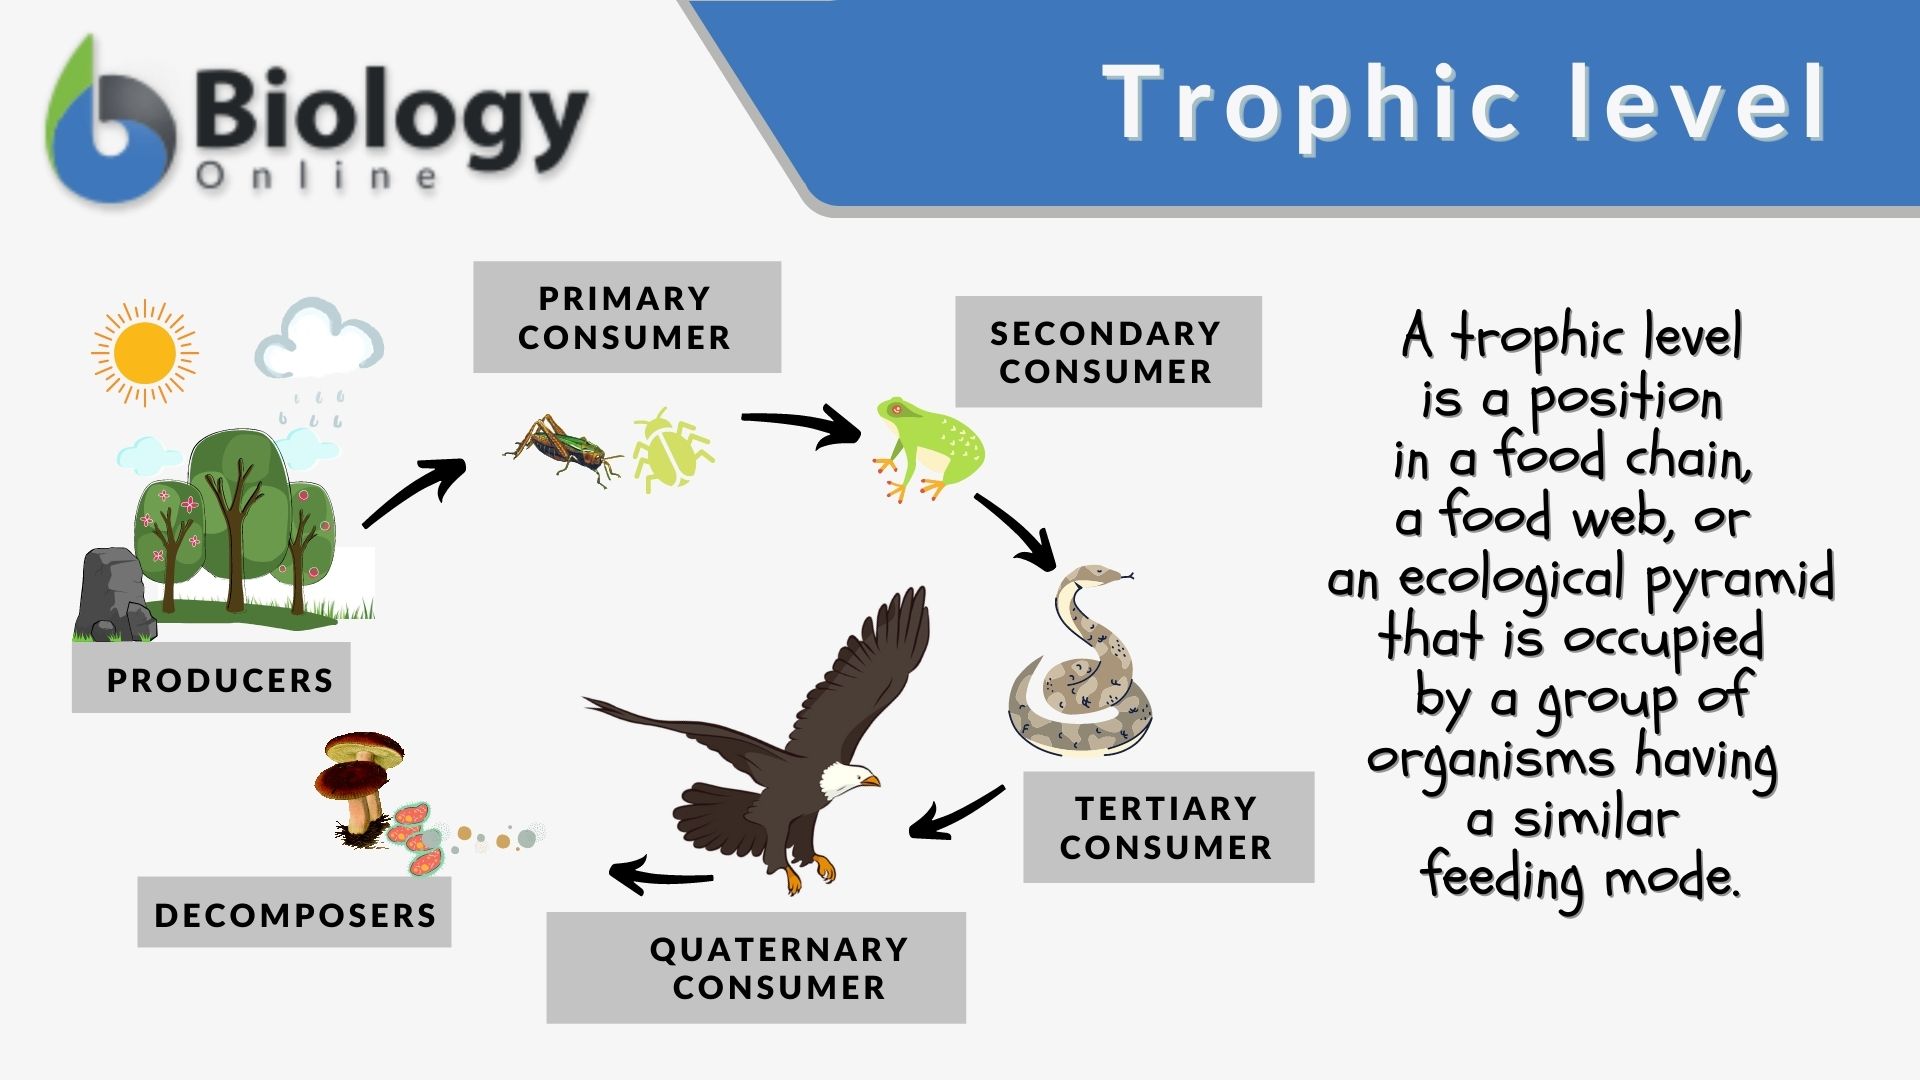 Trophic level Definition and Examples - Biology Online Dictionary